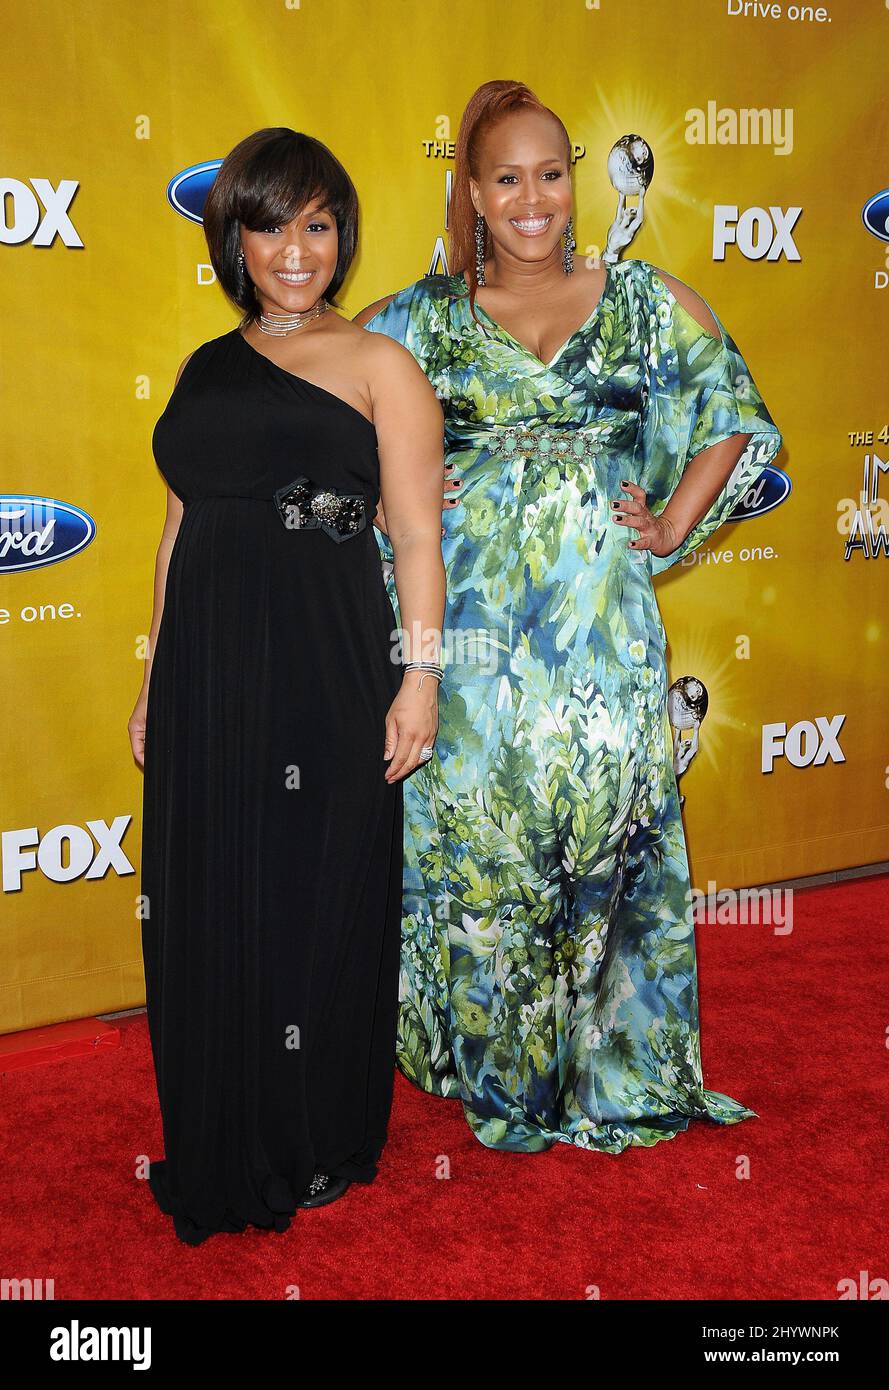 Erica Campbell and Tina Campbell arriving for the 41st NAACP Image Awards held at the Shrine Auditorium in Los Angeles, California, USA. Stock Photo